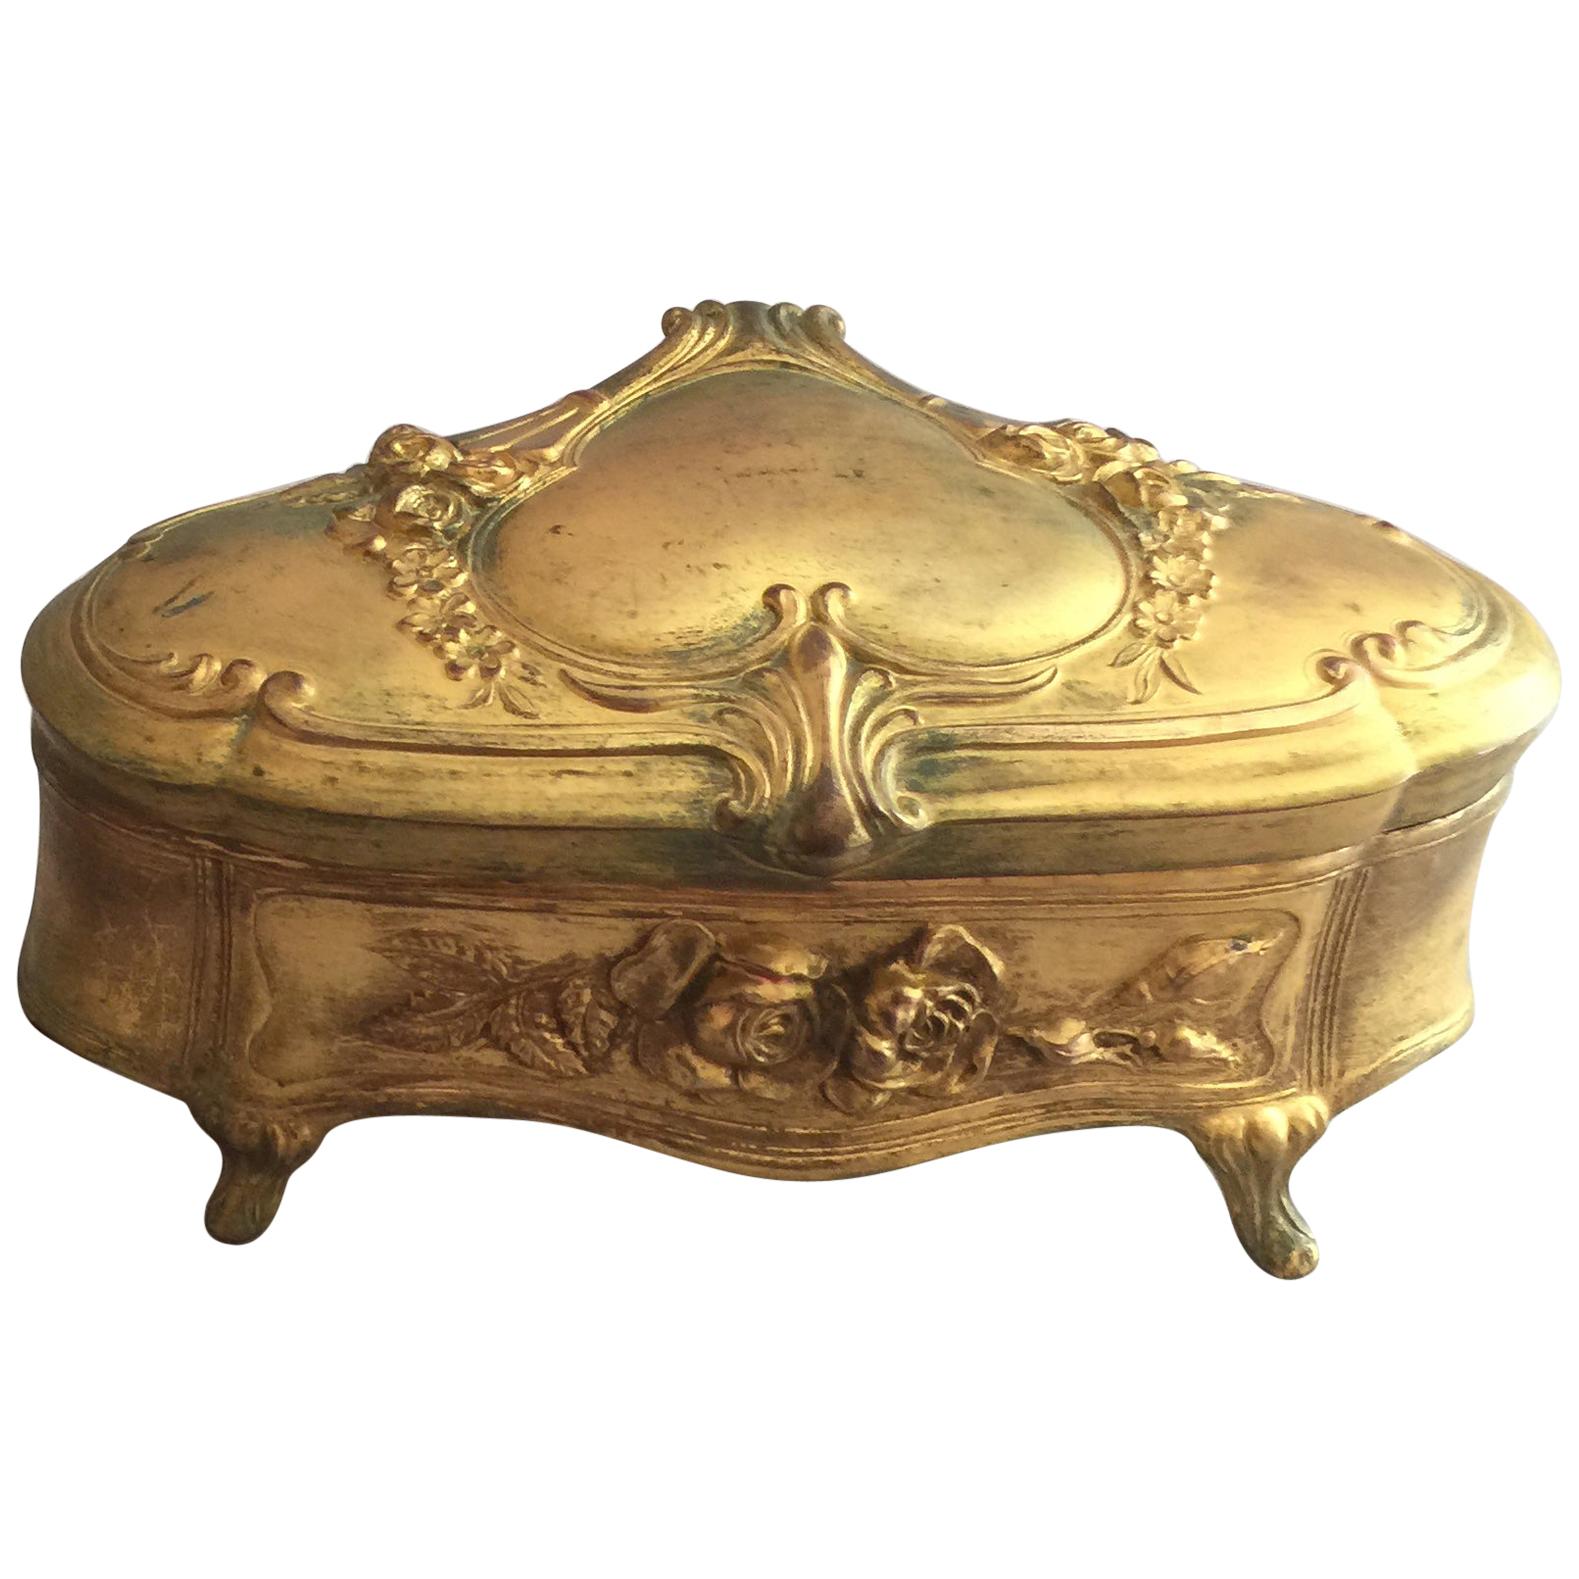 Antique Gilt Metal Jewelry Box, French Style, ca. 1920